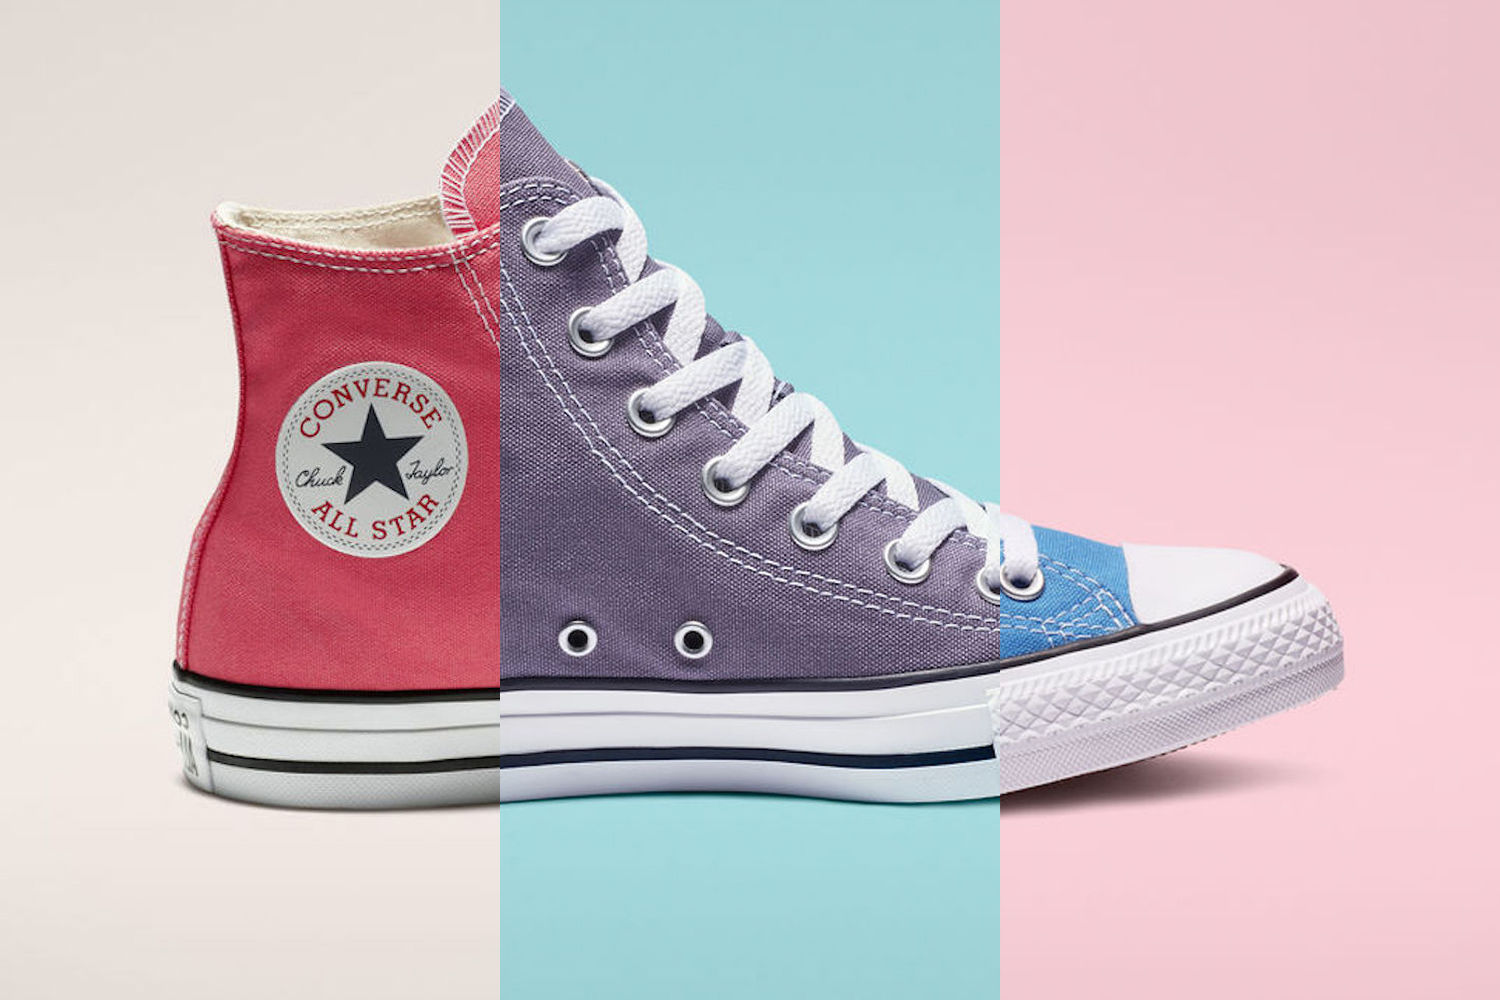 Converse Cut Prices on Over a Hundred 